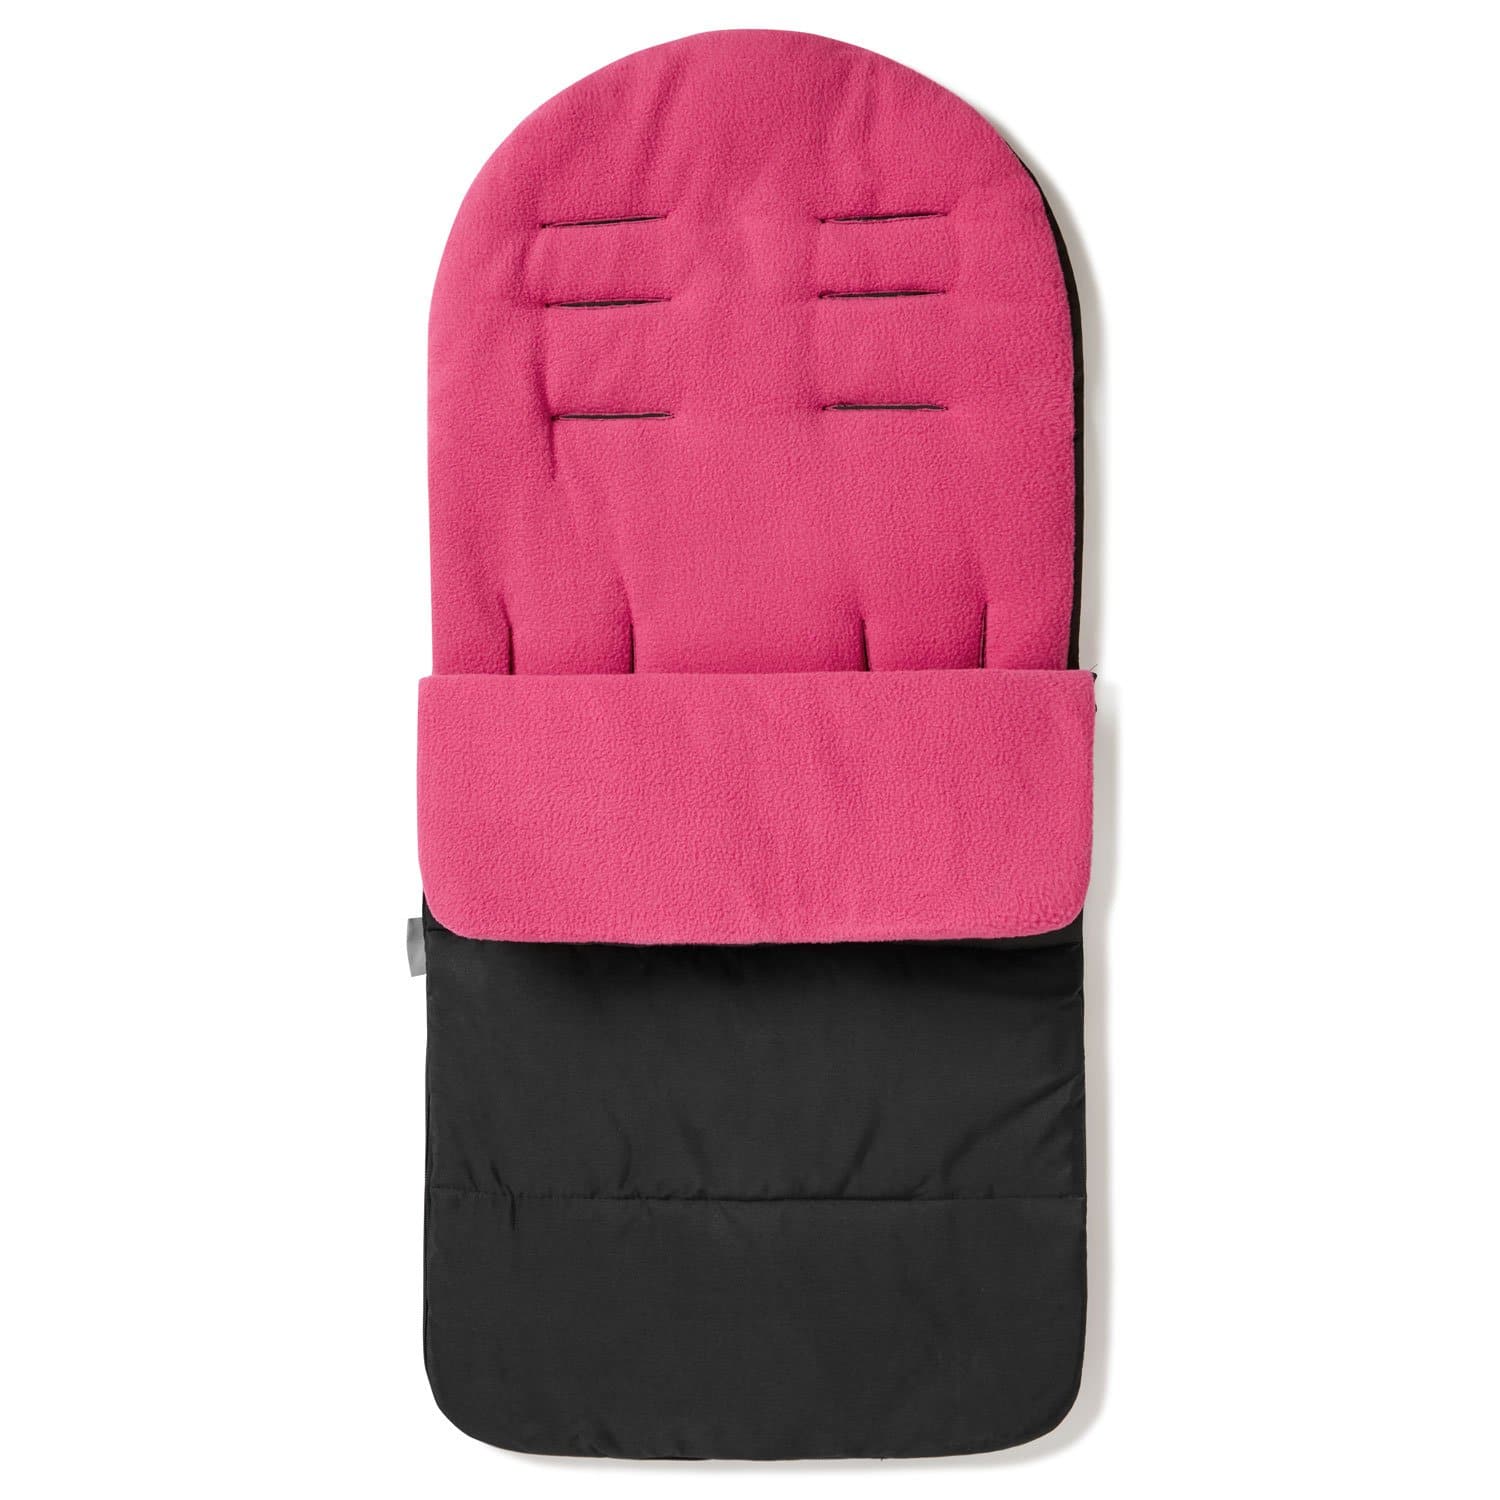 Premium Footmuff / Cosy Toes Compatible with Bebe 9 - Pink Rose / Fits All Models | For Your Little One